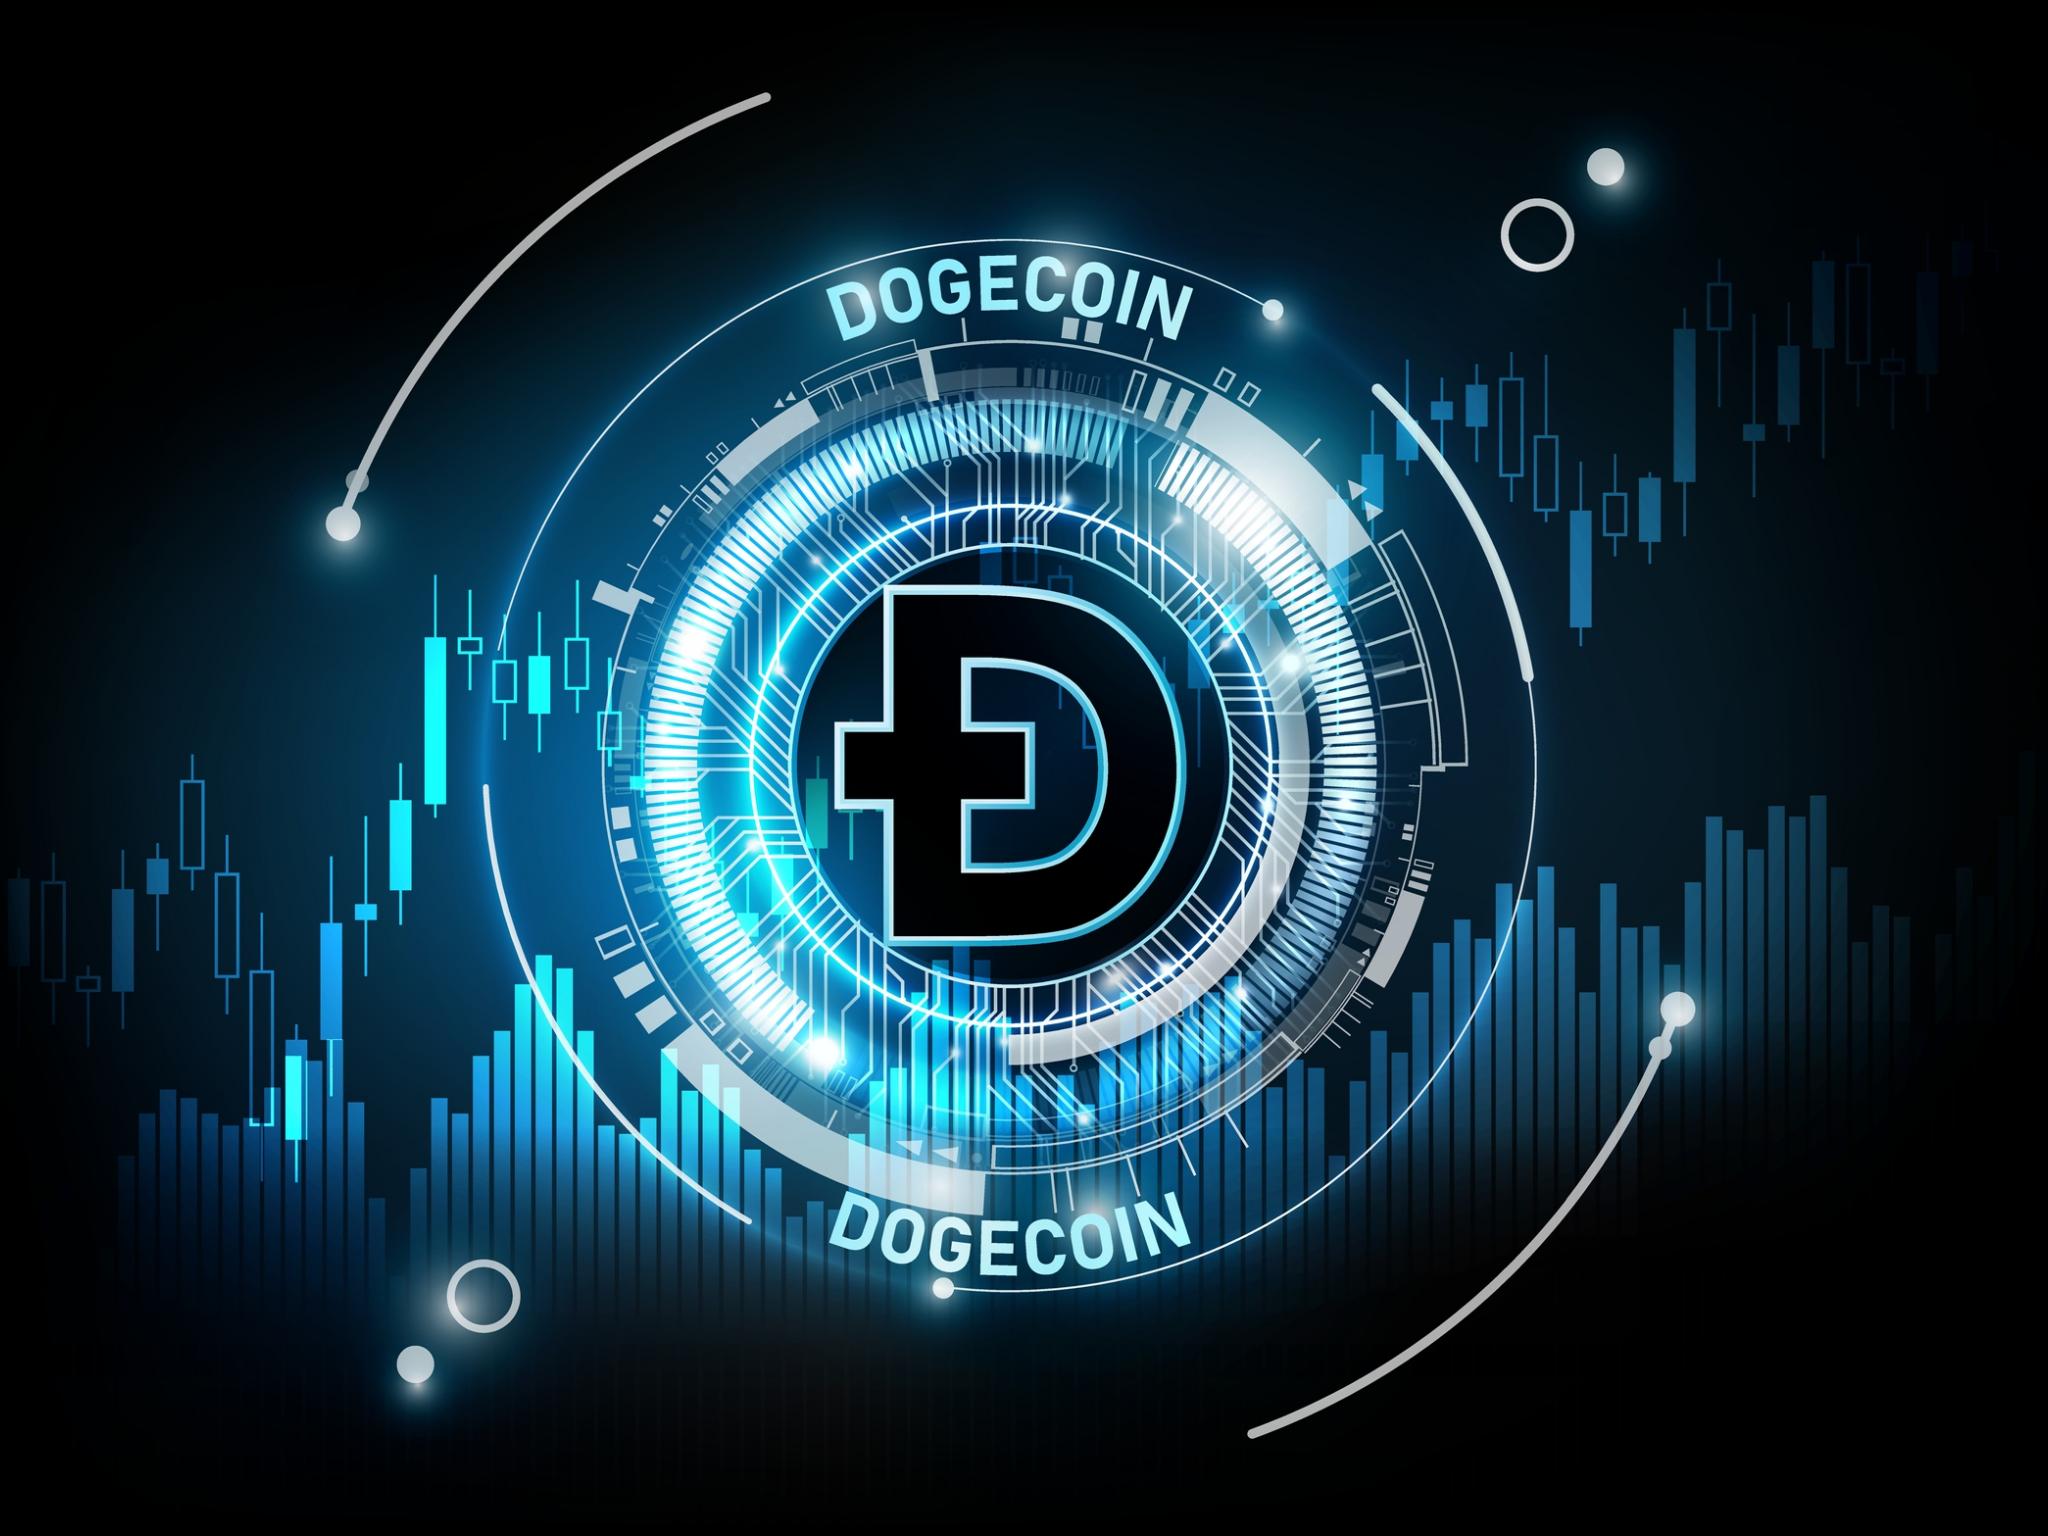  dogecoin-daily-price-remains-muted-vitalik-buterin-sends-1m-to-foundation-elon-musk-holdings-poll-and-more 